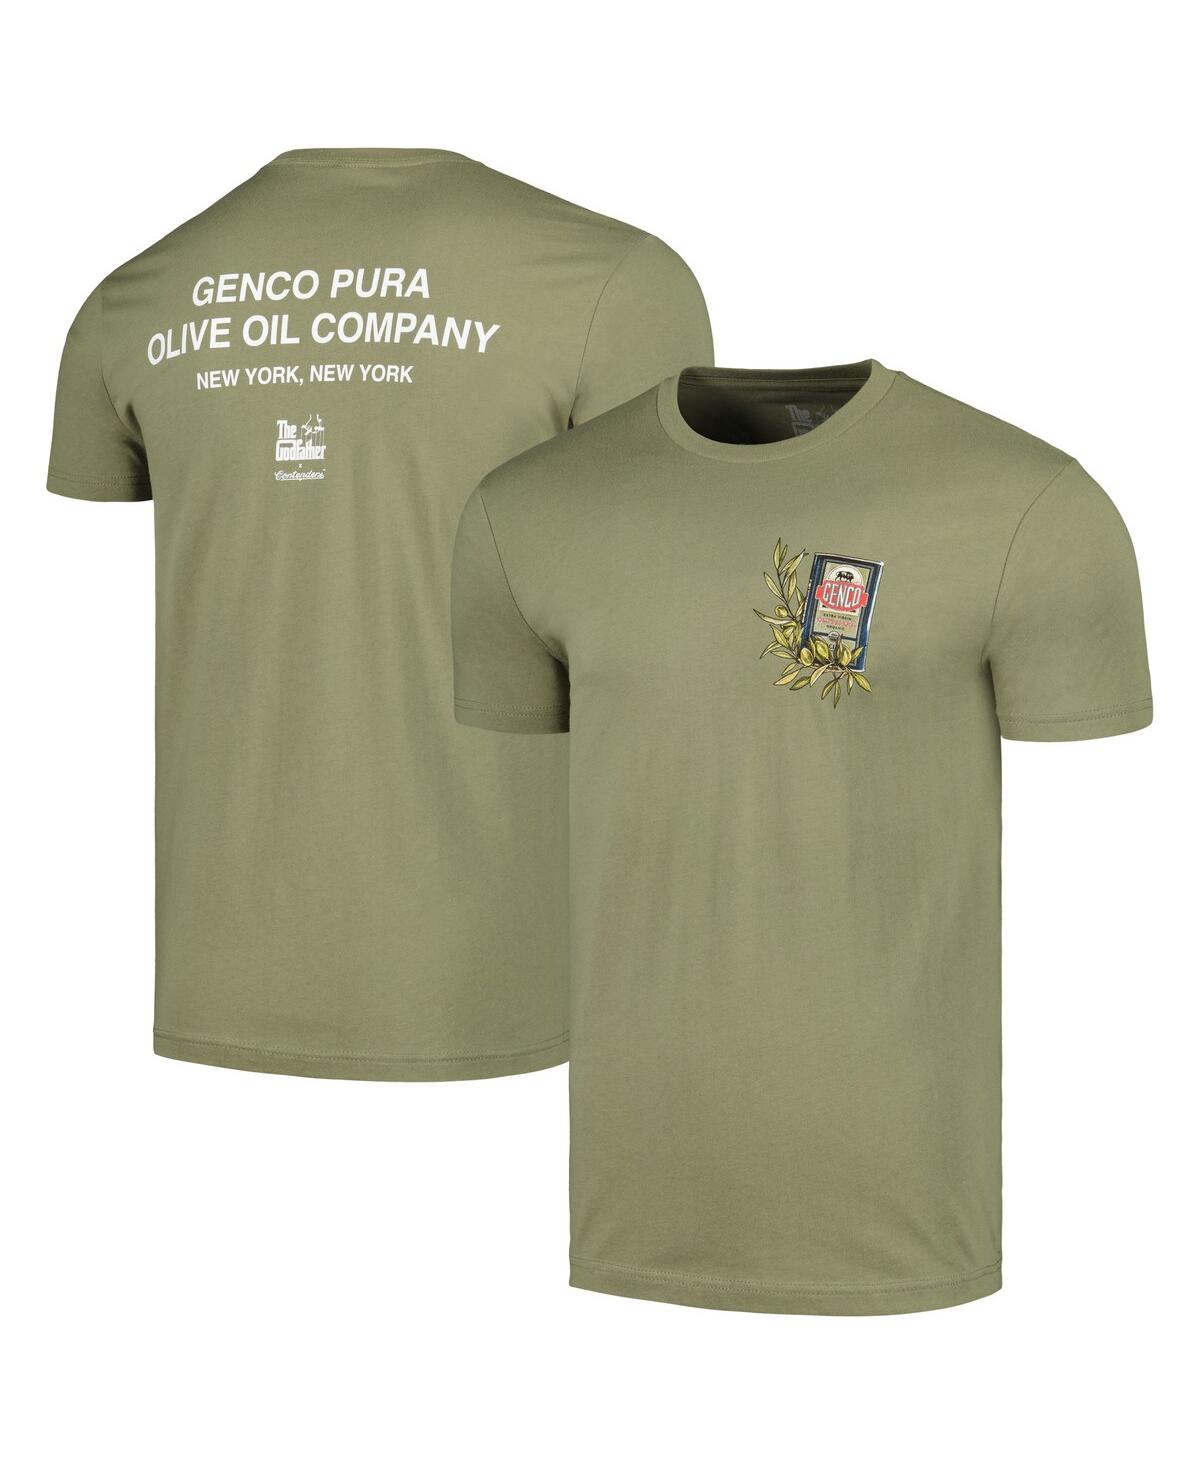 Men's Contenders Clothing Olive The Godfather Genco Pura Olive Oil T-shirt - Olive